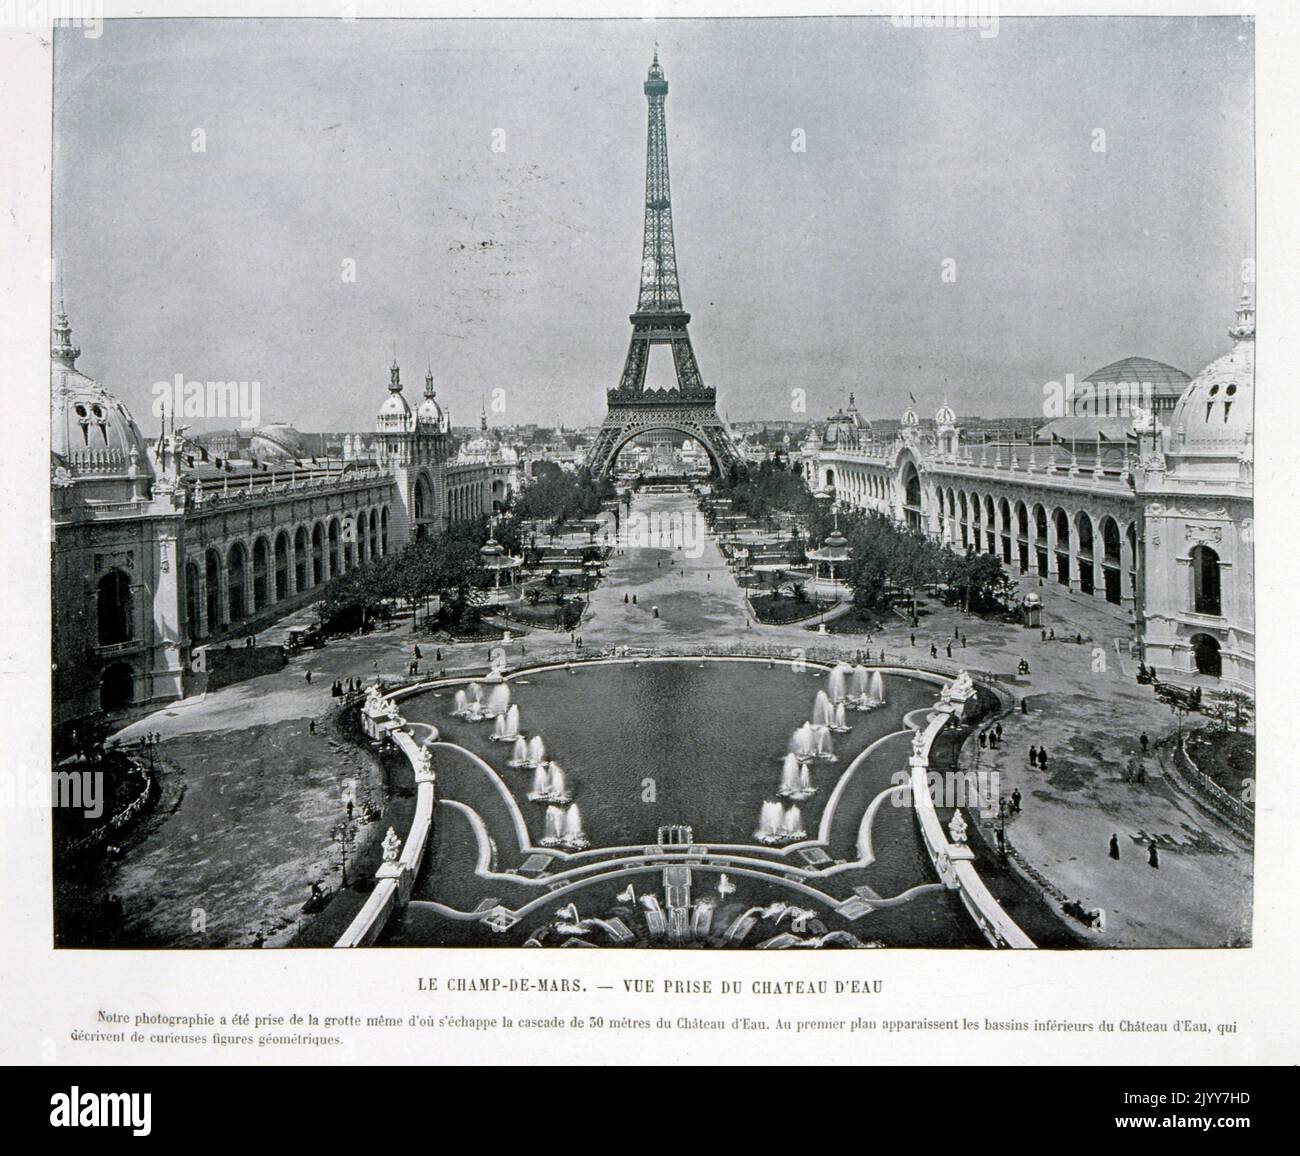 Exposition Universelle (World Fair) Paris, 1900; black and white photograph; Le Champ-de-Mars; view of the Eiffel Tower taken from the Chateau d'Eu. Stock Photo